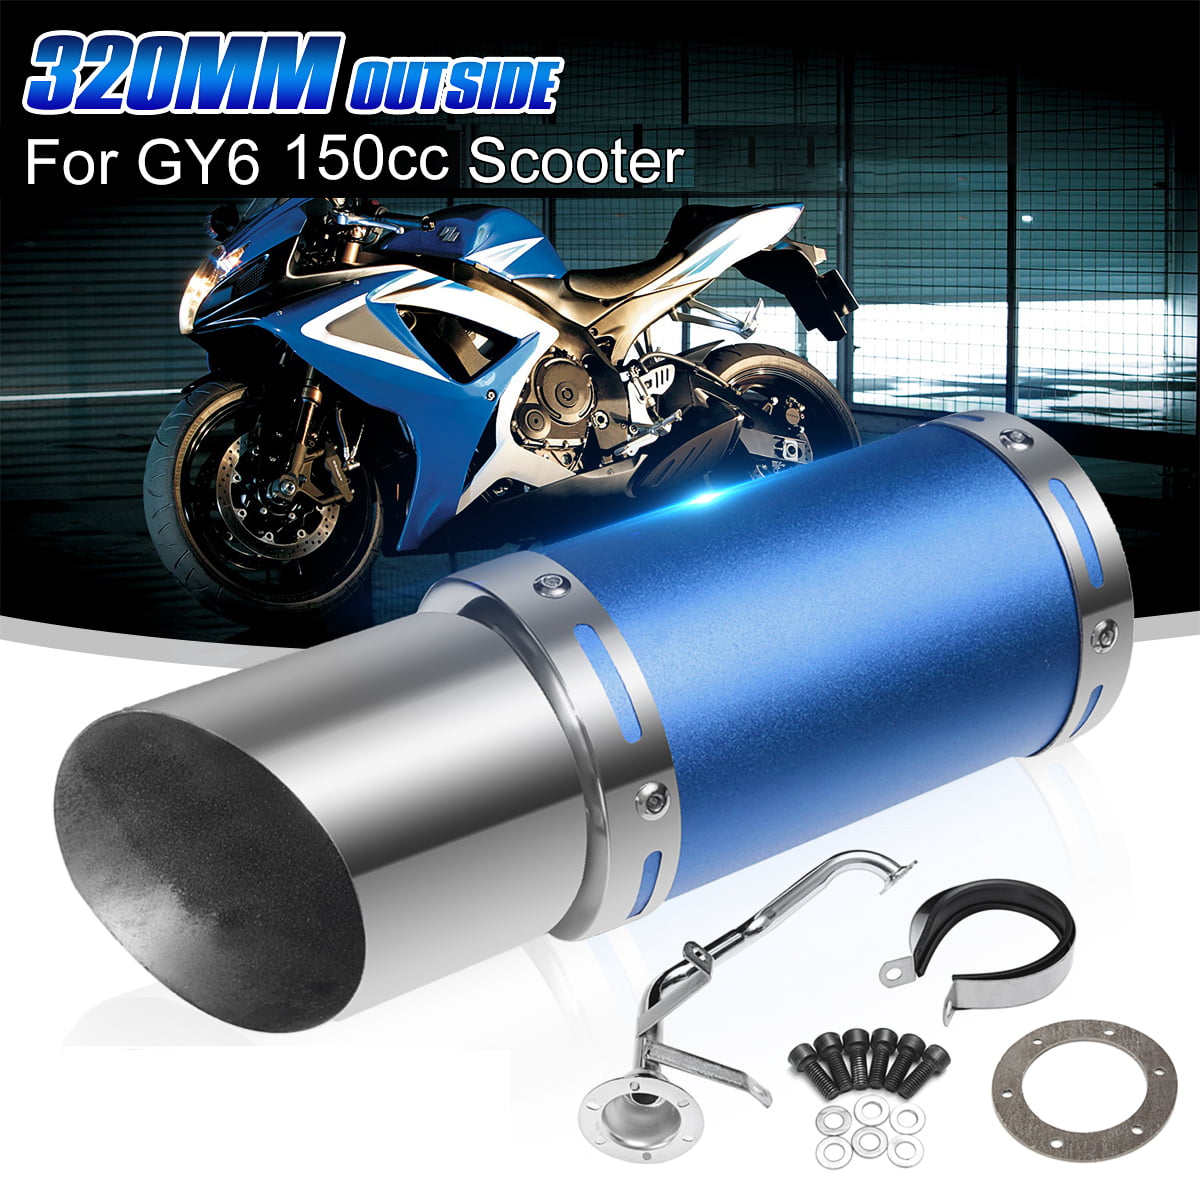 Motorcycle Exhaust 51mm Universal Motorbike Silencer Accessories Muffler Rear Tailpipe DB Killer Modified Noise Eliminator for Scooter ATV Pit Bike Black 1